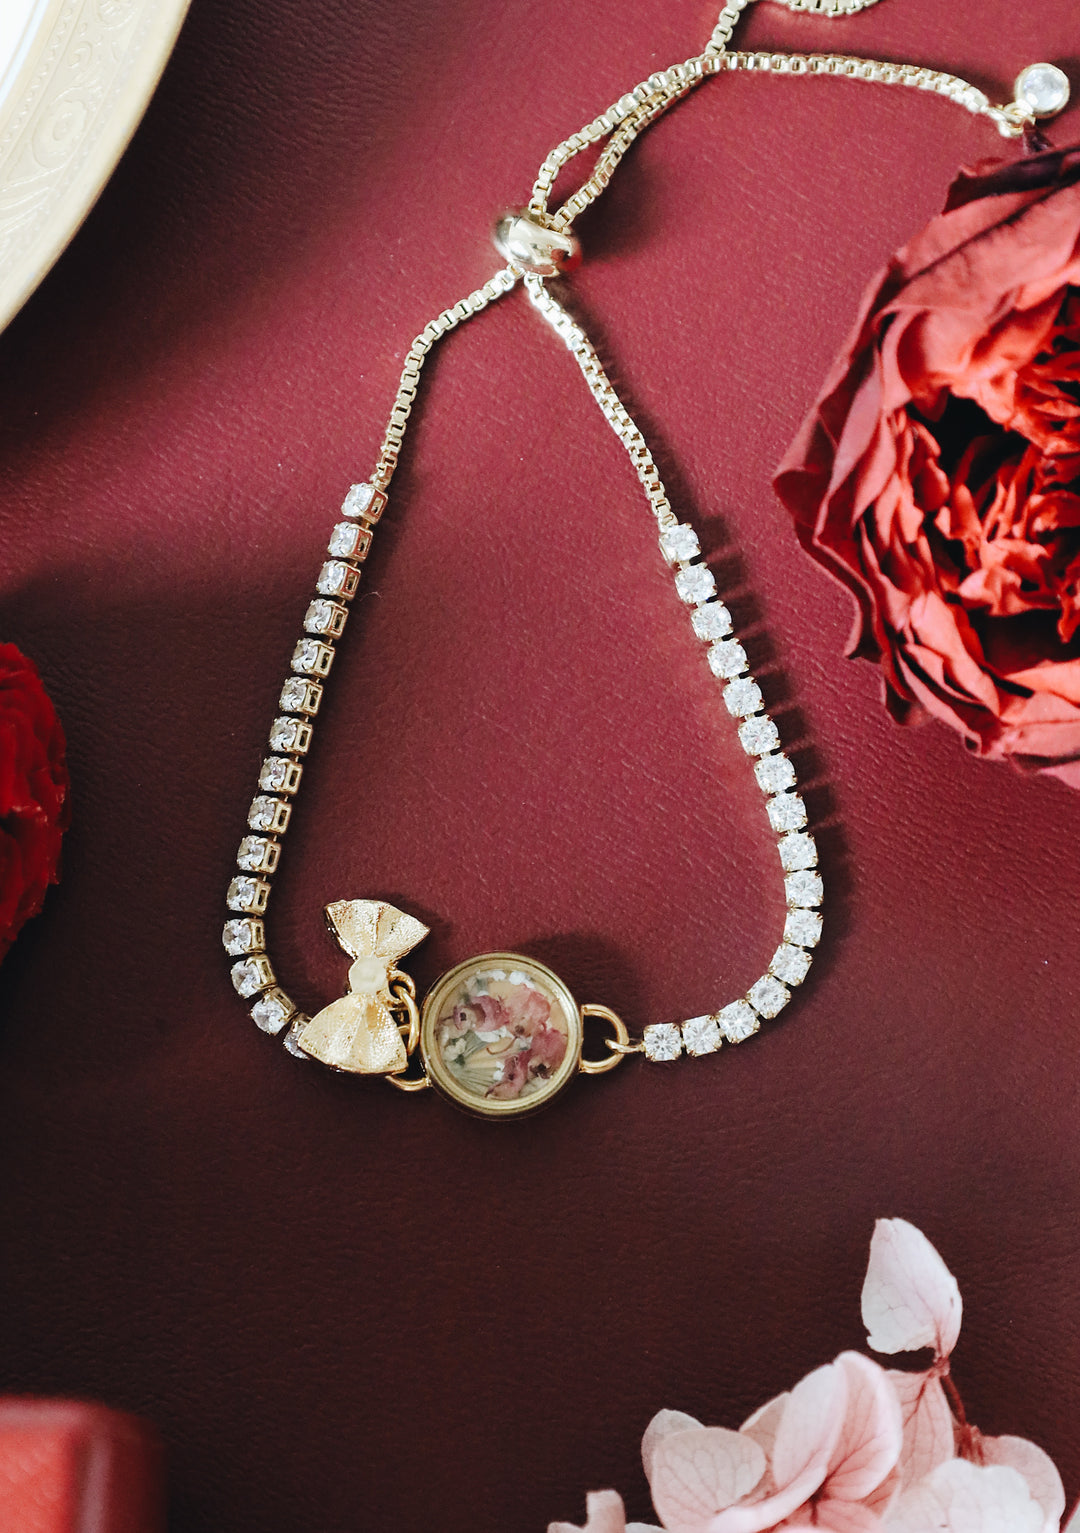 LIMITED VALENTINE COLLECTION'S " KEEPSAKE GOLD  LOCKET & PINK HEATHER FLOWER, MEMORABLE JEWELRY BY ROBINWOOD.